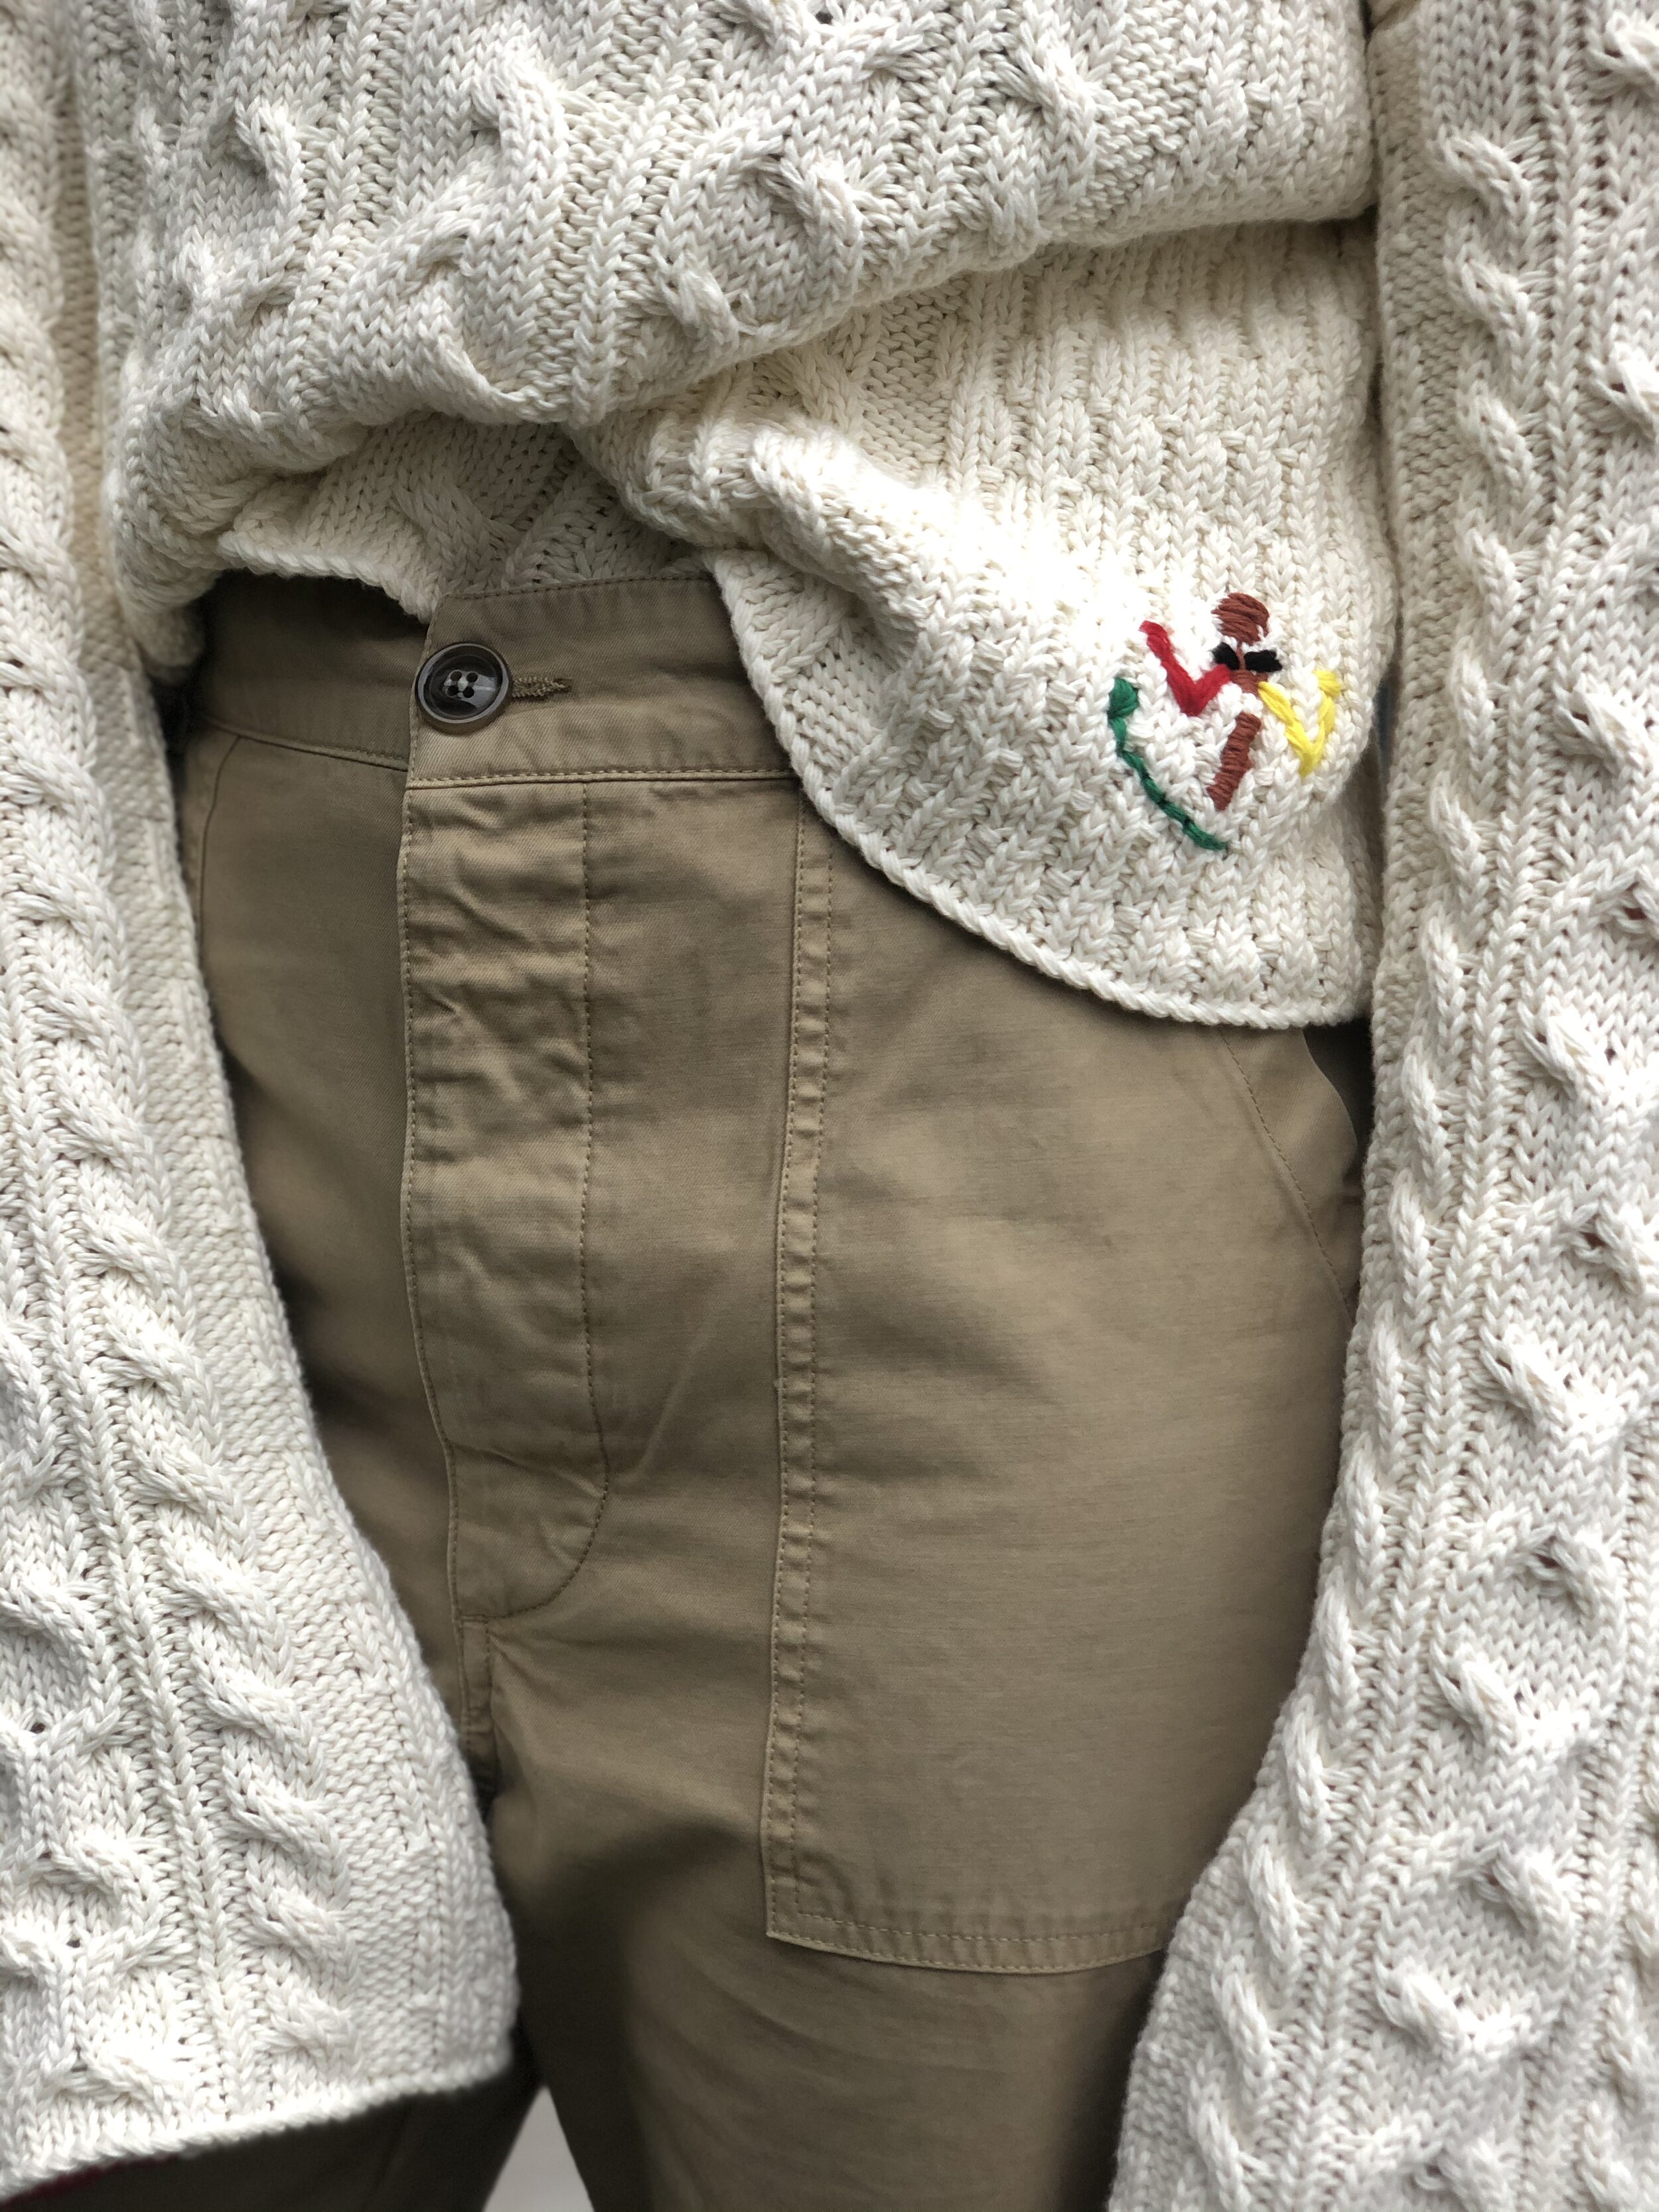  Up close on those little embroidered details. 